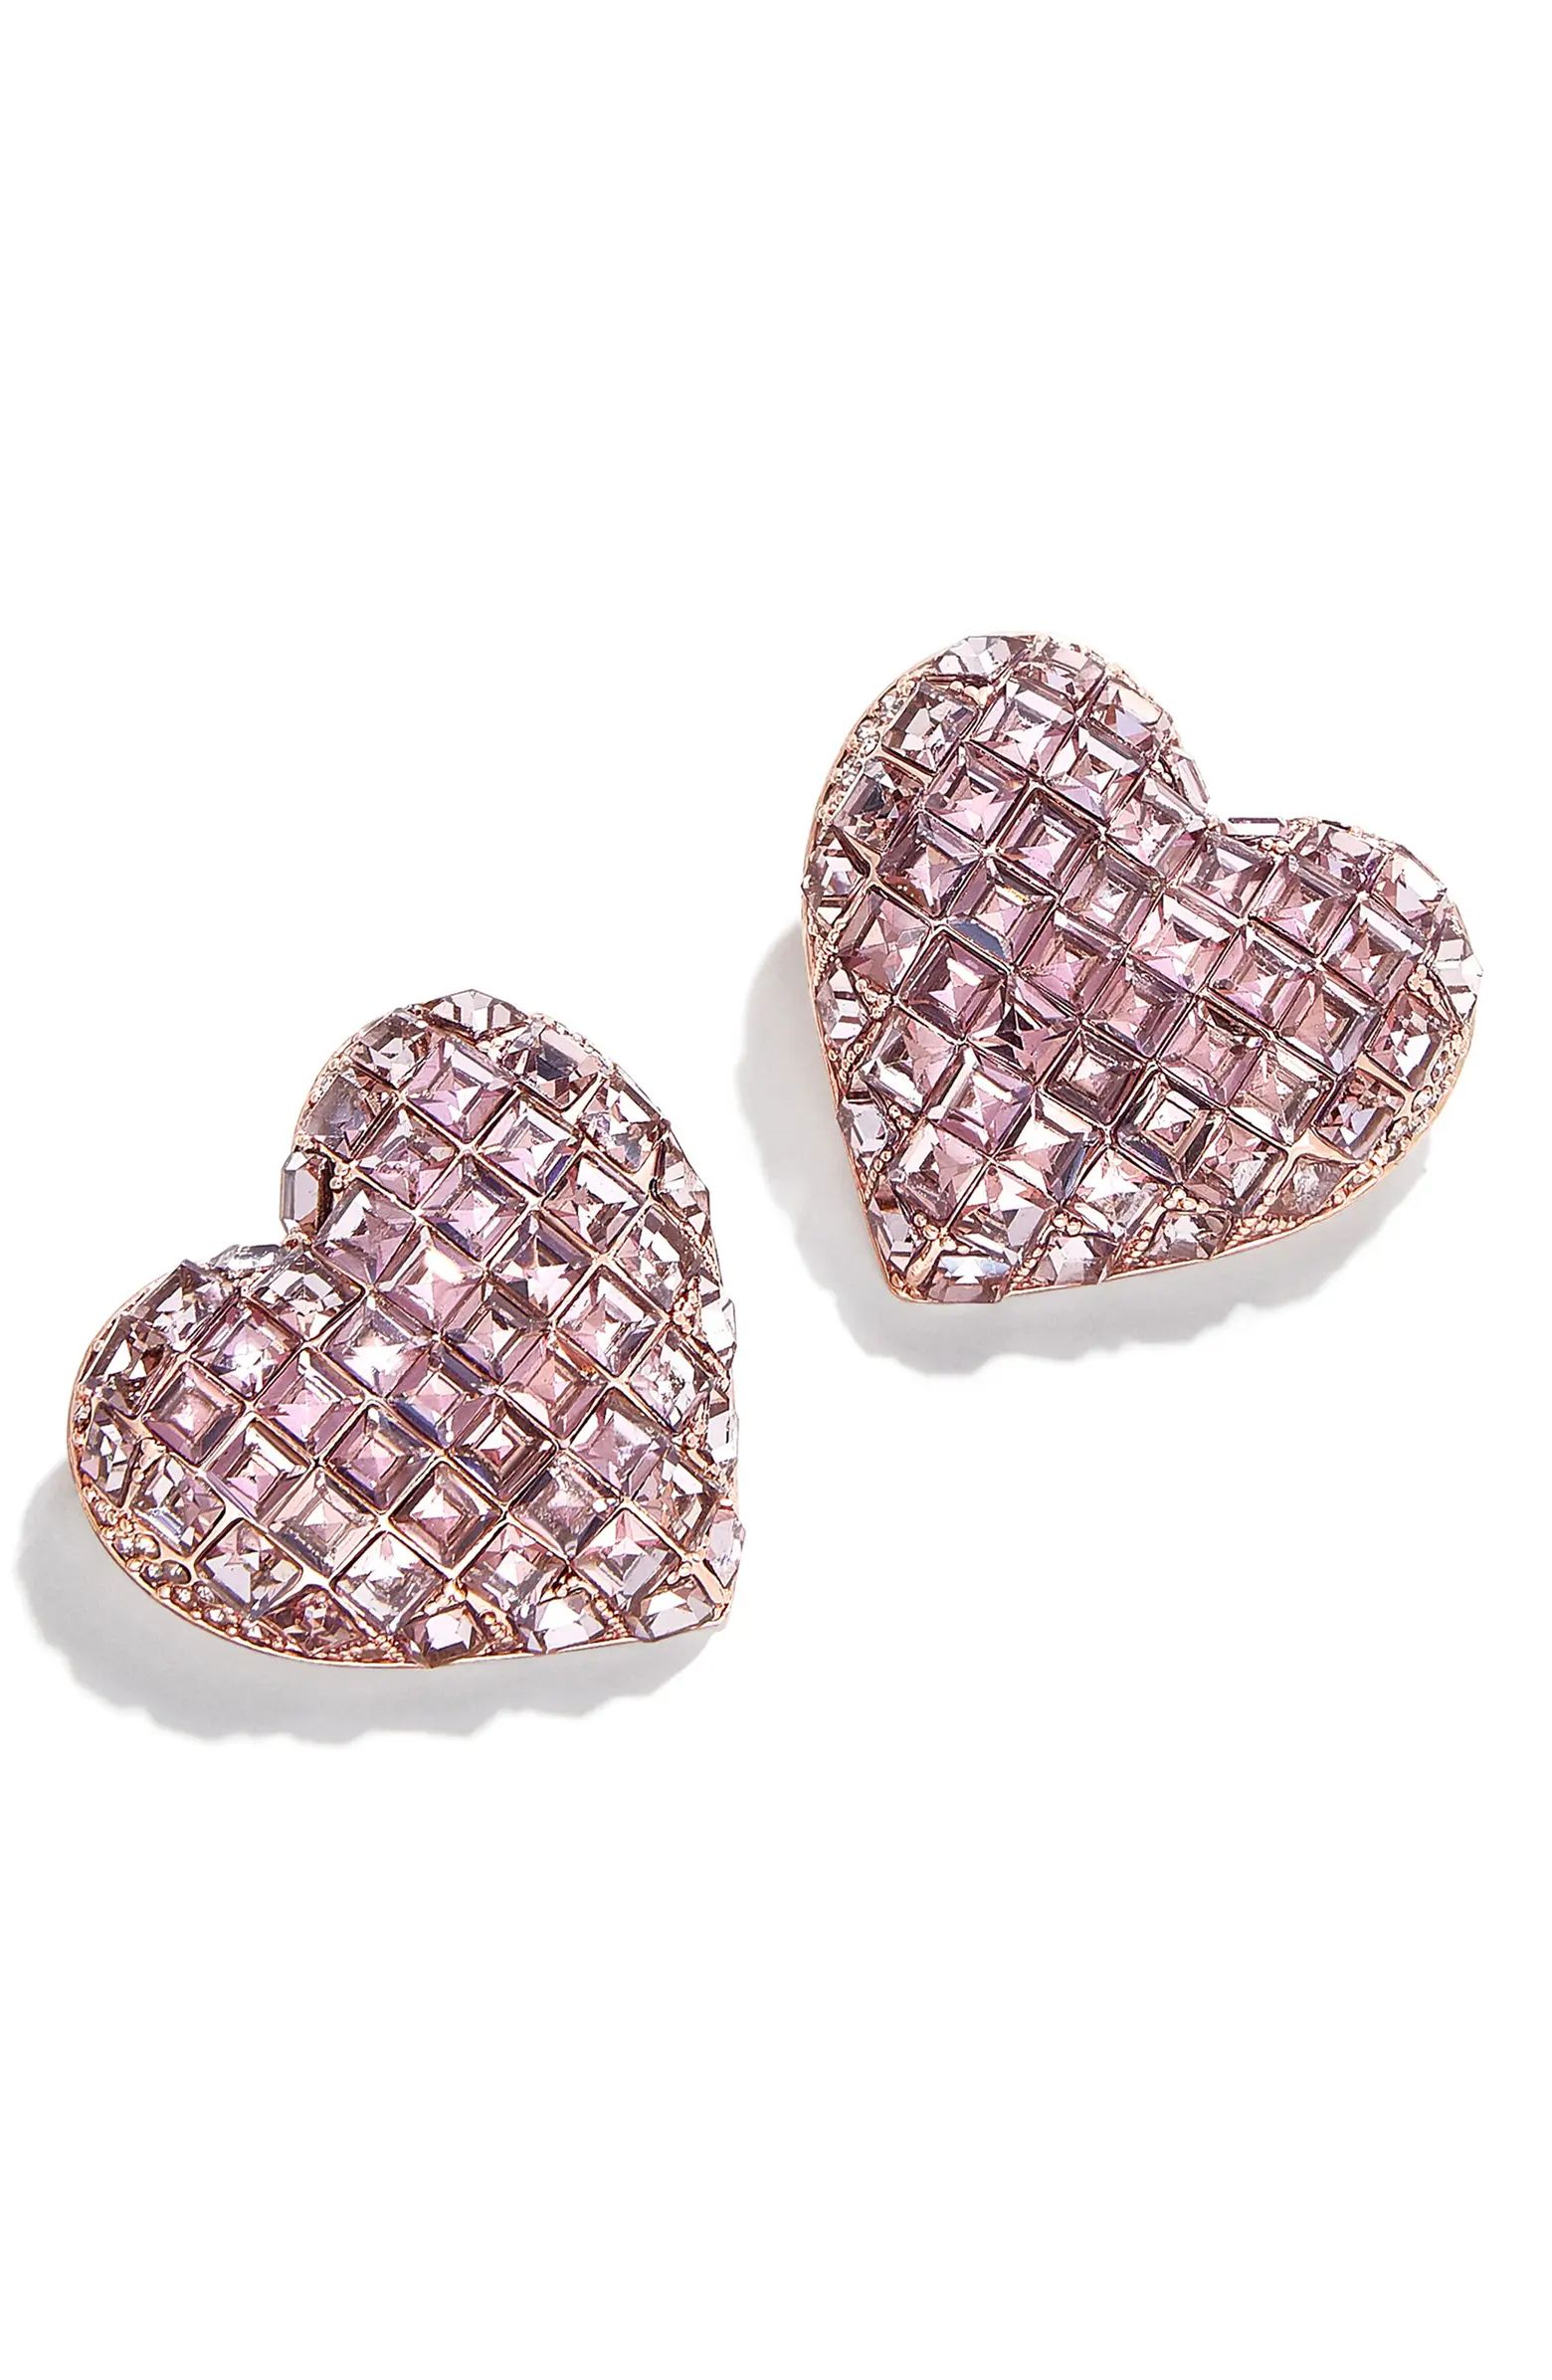 Jill Heart Stud EarringsBAUBLEBAR$44.00Current Price $44.00FREE SHIPPING Get a $40 Bonus Note wh... | Nordstrom